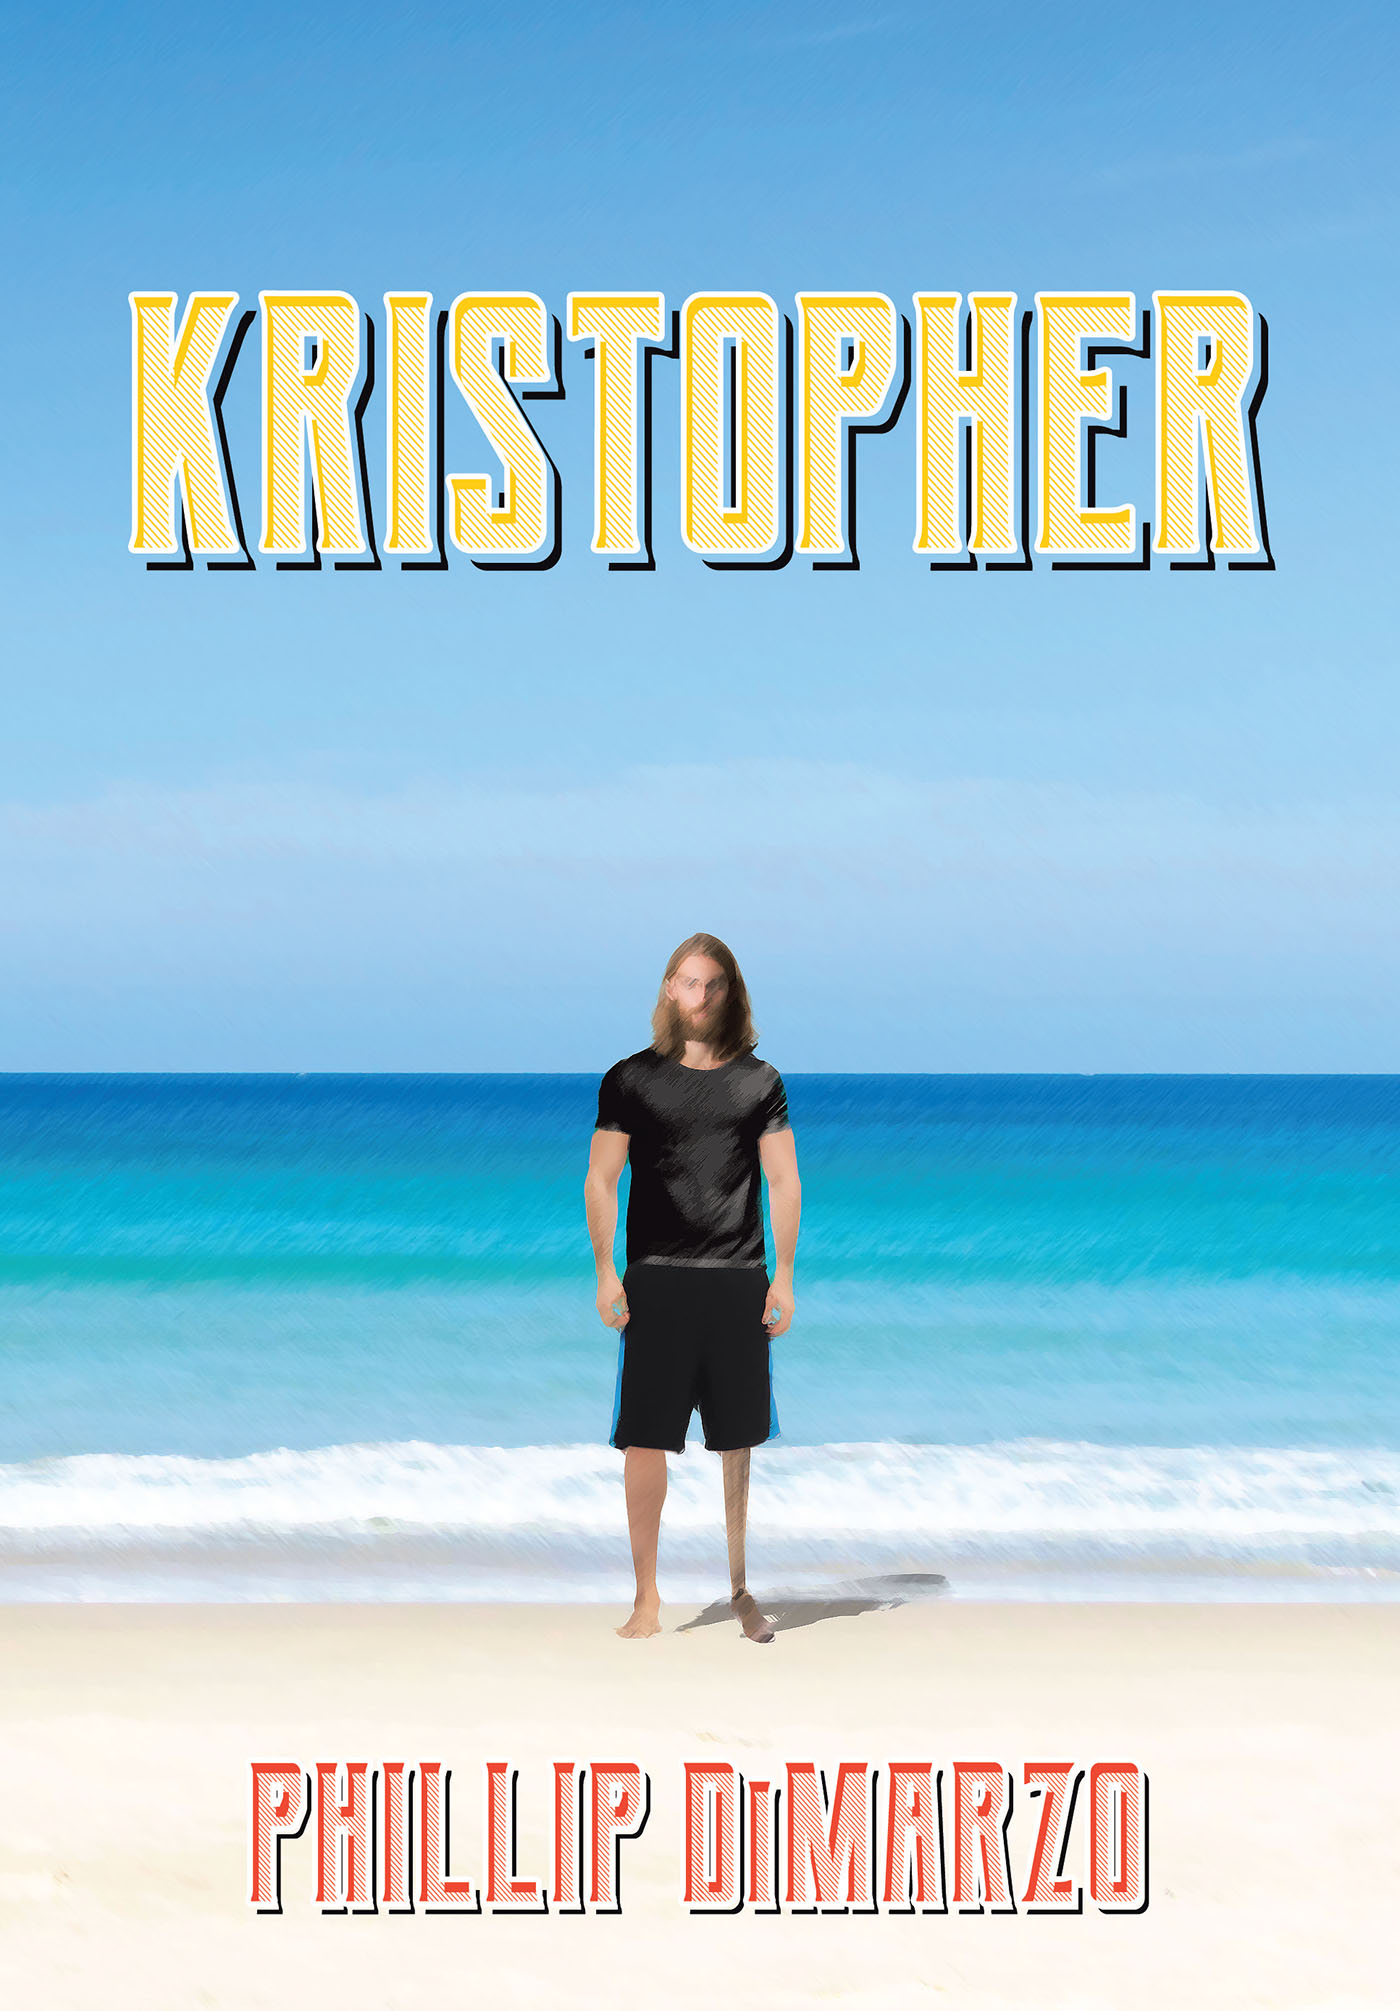 Author Phillip DiMarzo’s New Book “Kristopher,” is an Intense Dramatic Work Following an Otherworldly and Malevolent Being Through the Decades of His Torturous Existence